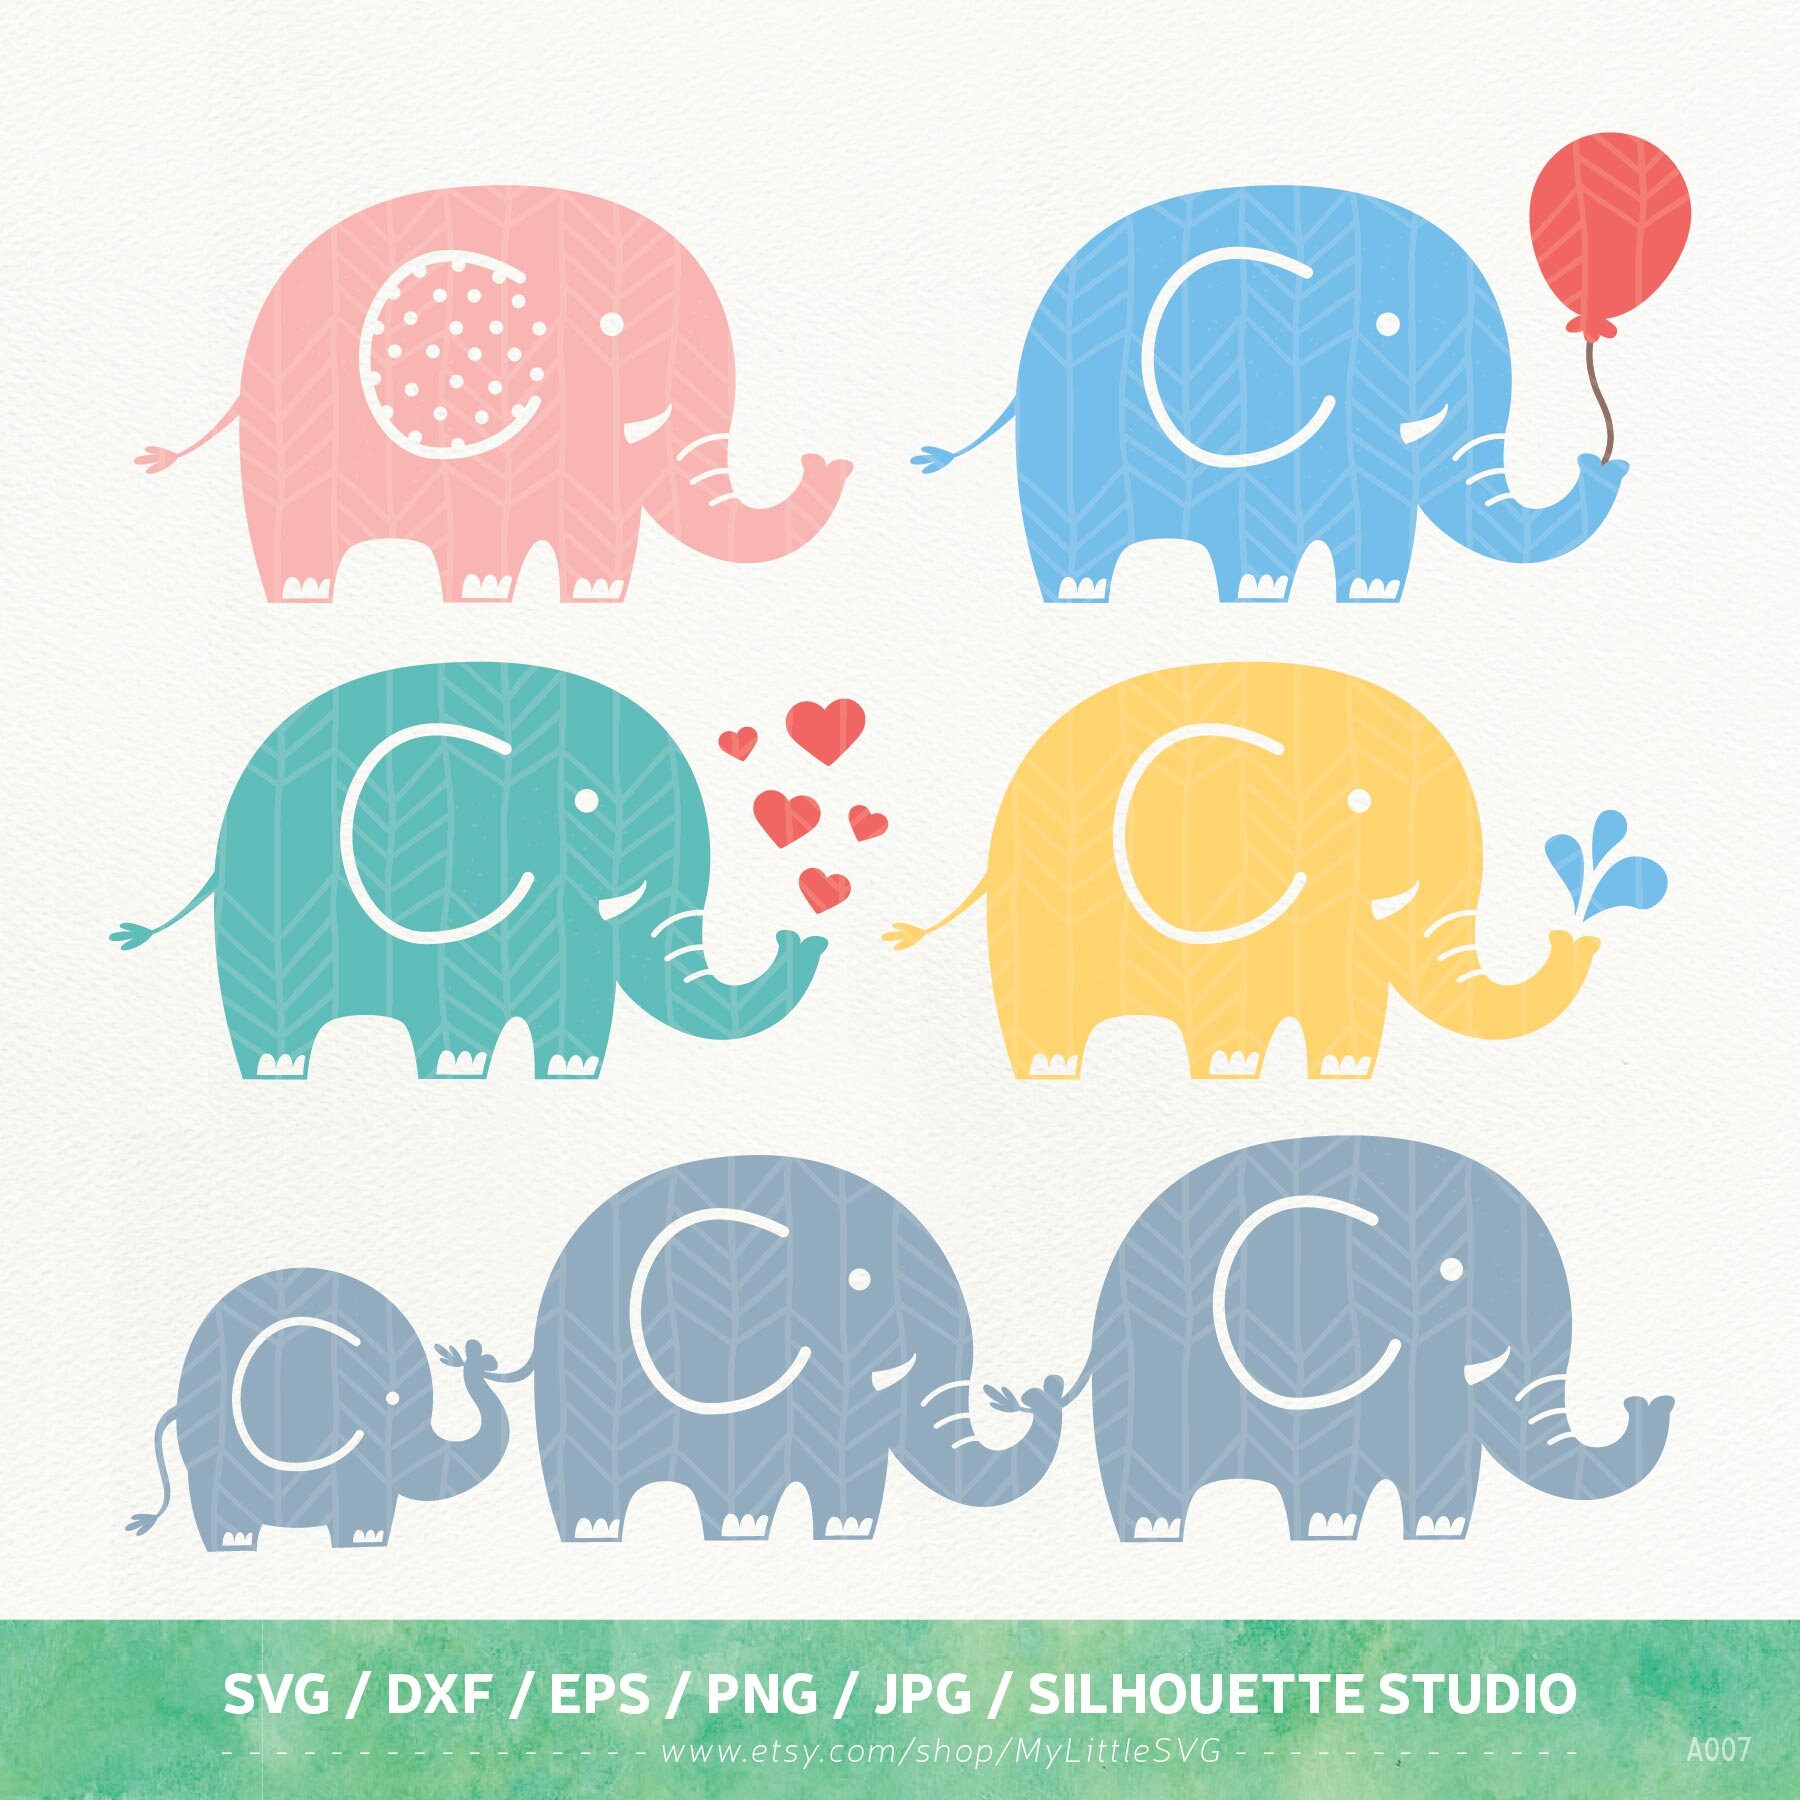 Download Elephant SVG Files Elephant dxf png eps Silhouette Studio